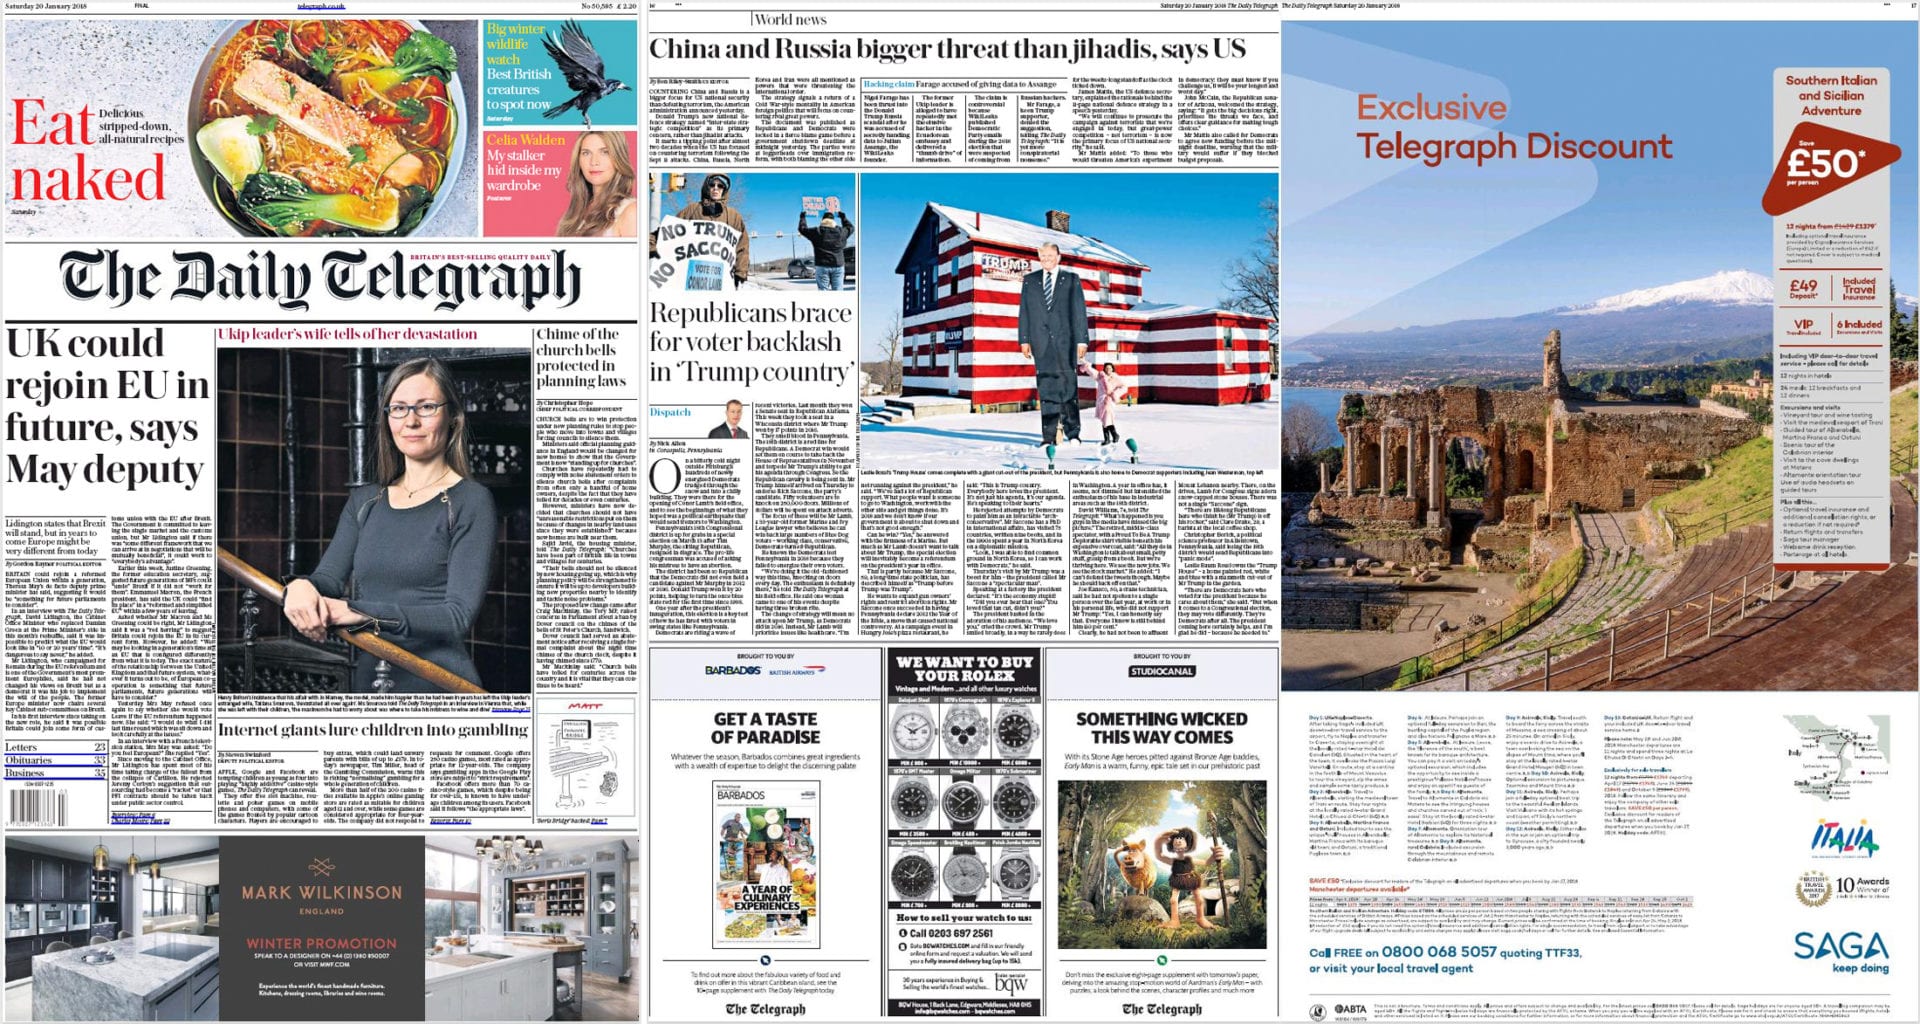 Three pages from the January 20th 2018 Daily Telegraph newspaper. The page on the left is the front page. The two on the right are a spread from the World News section showing a story about republican backlash against president Trump with photos by an Editorial Photographer in Pittsburgh.